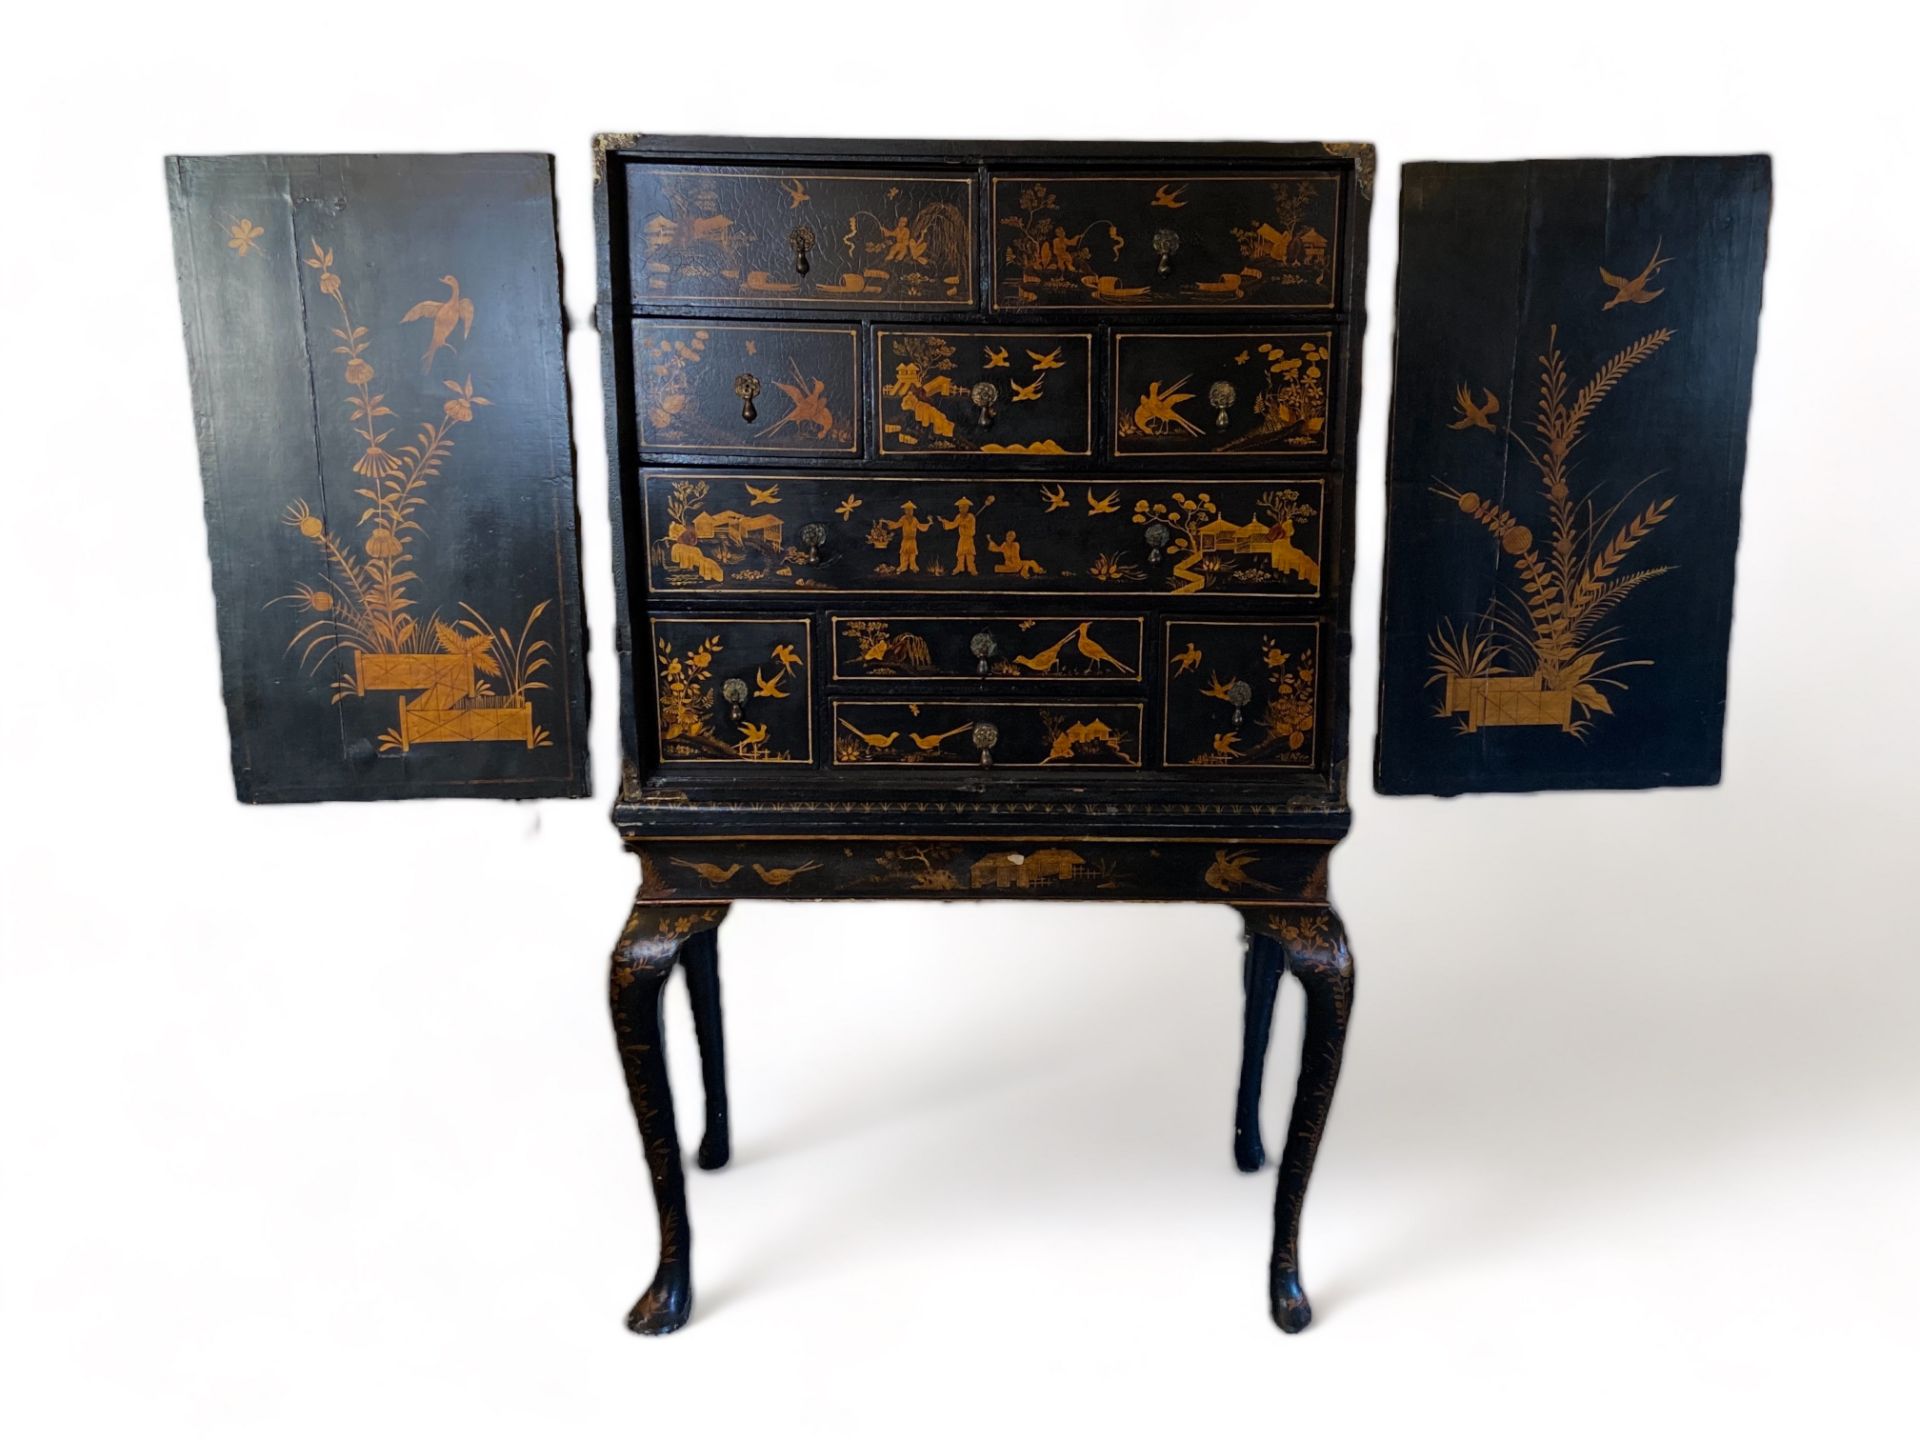 An early 18th century Chinese export black lacquer cabinet on a European stand - Image 19 of 36